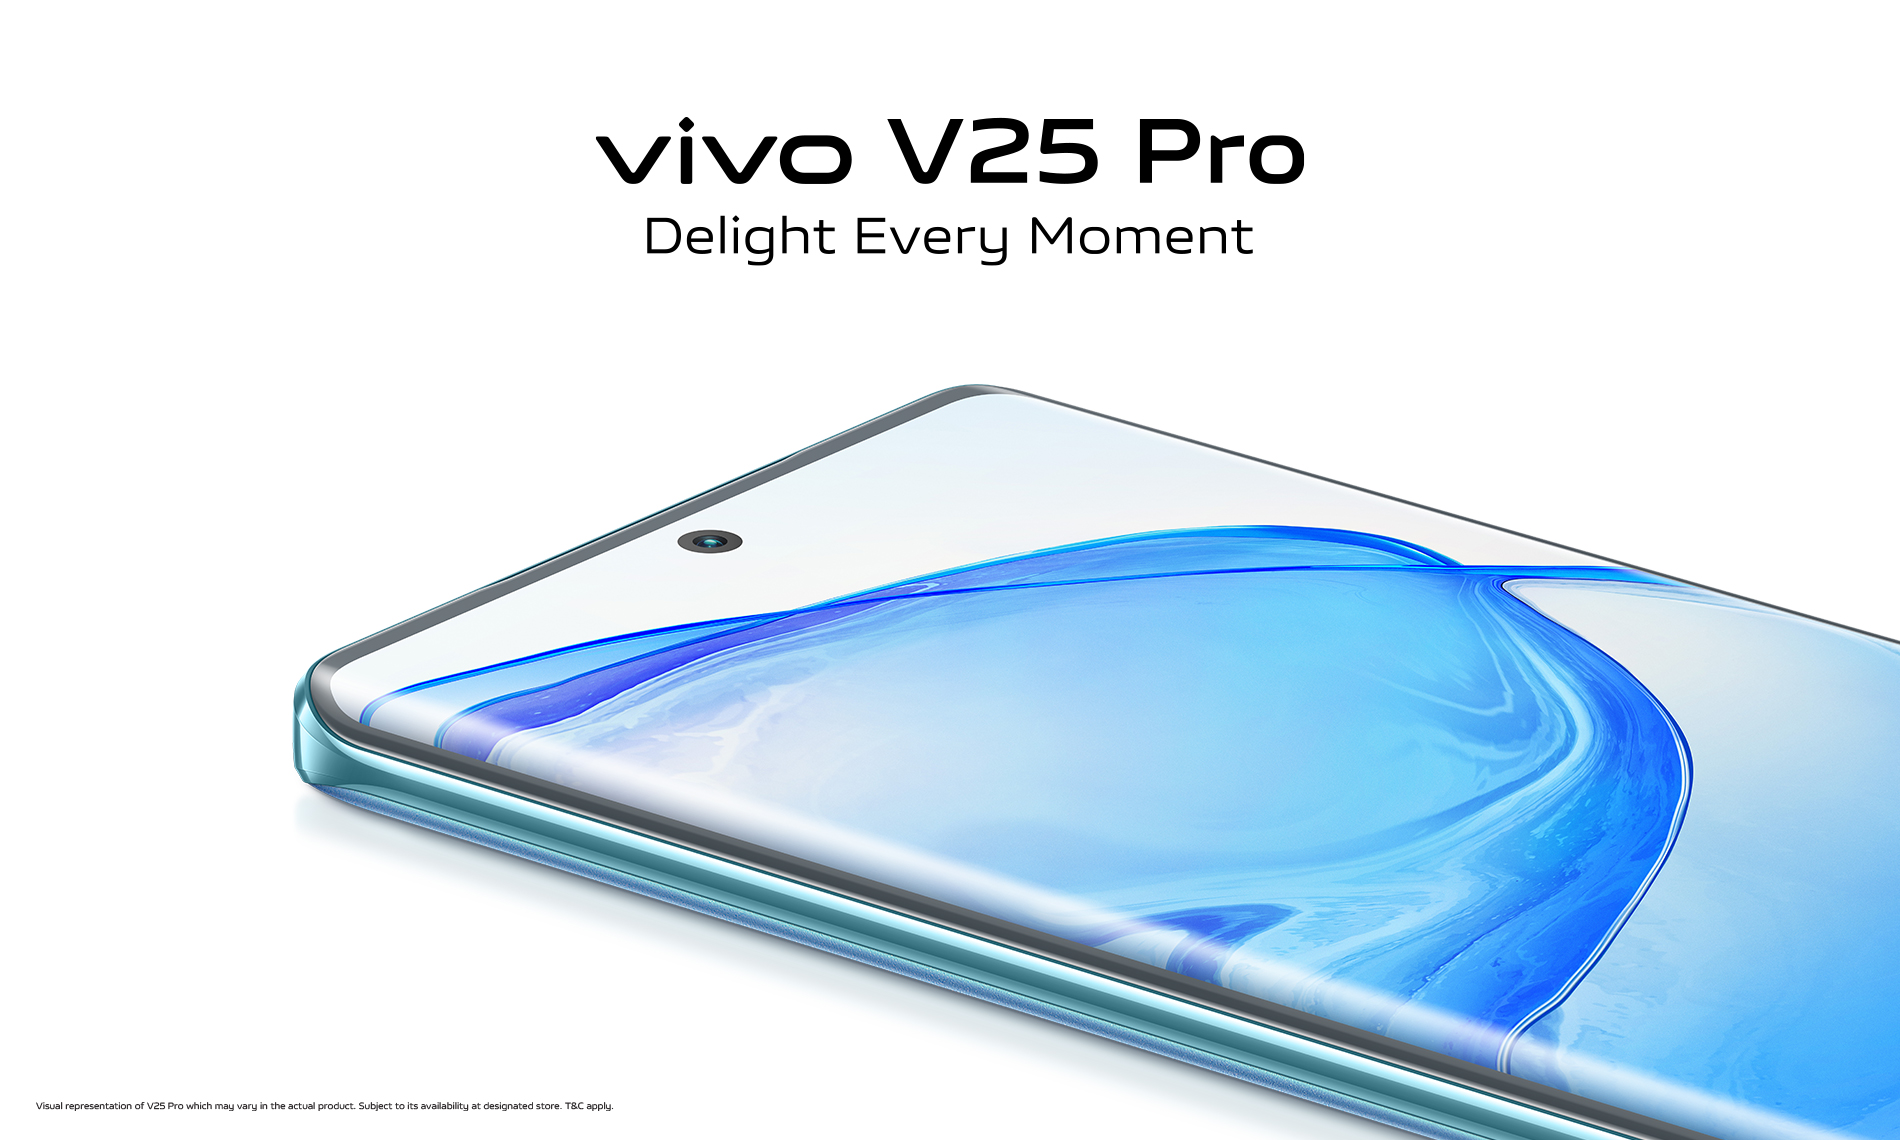 vivo launches the all-new magical V25 Pro with color-changing tech and 64MP OIS Night Camera